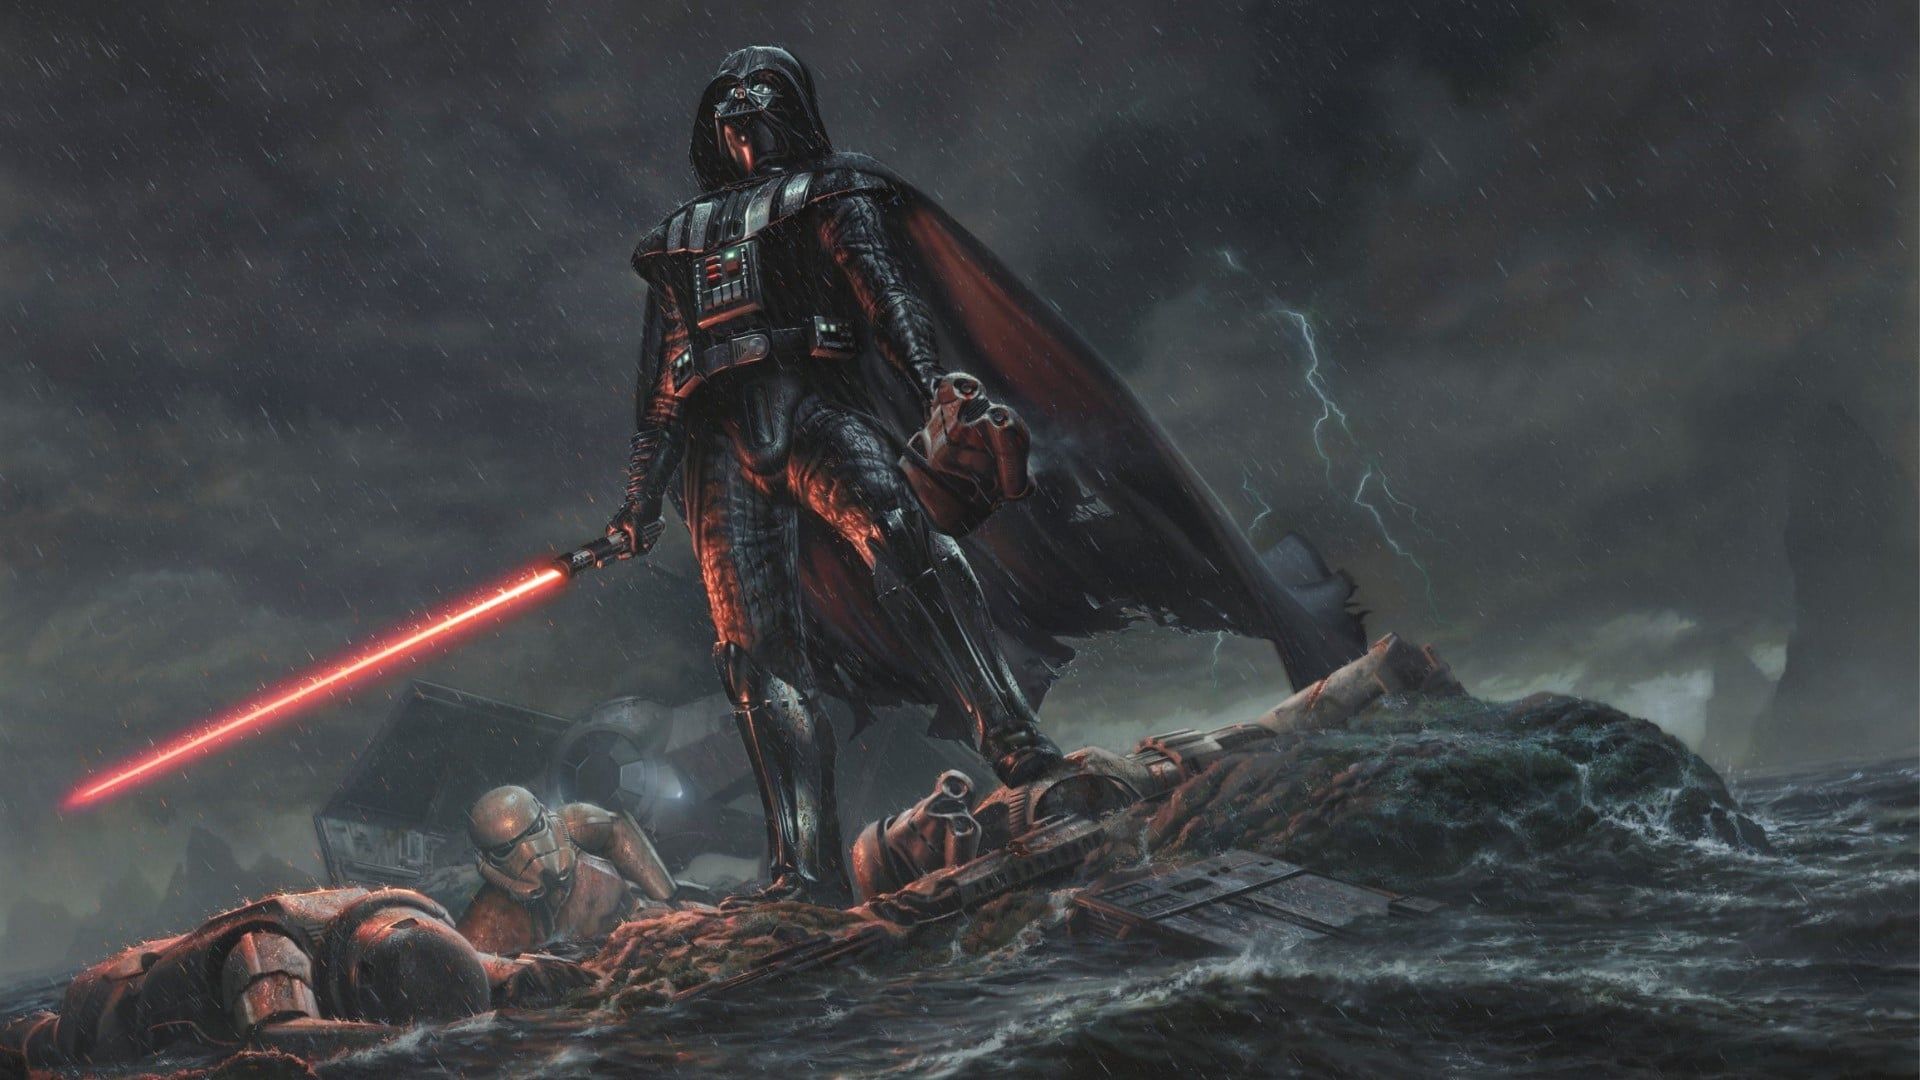 Darth Vader standing on a pile of dead bodies in the sea - Darth Vader